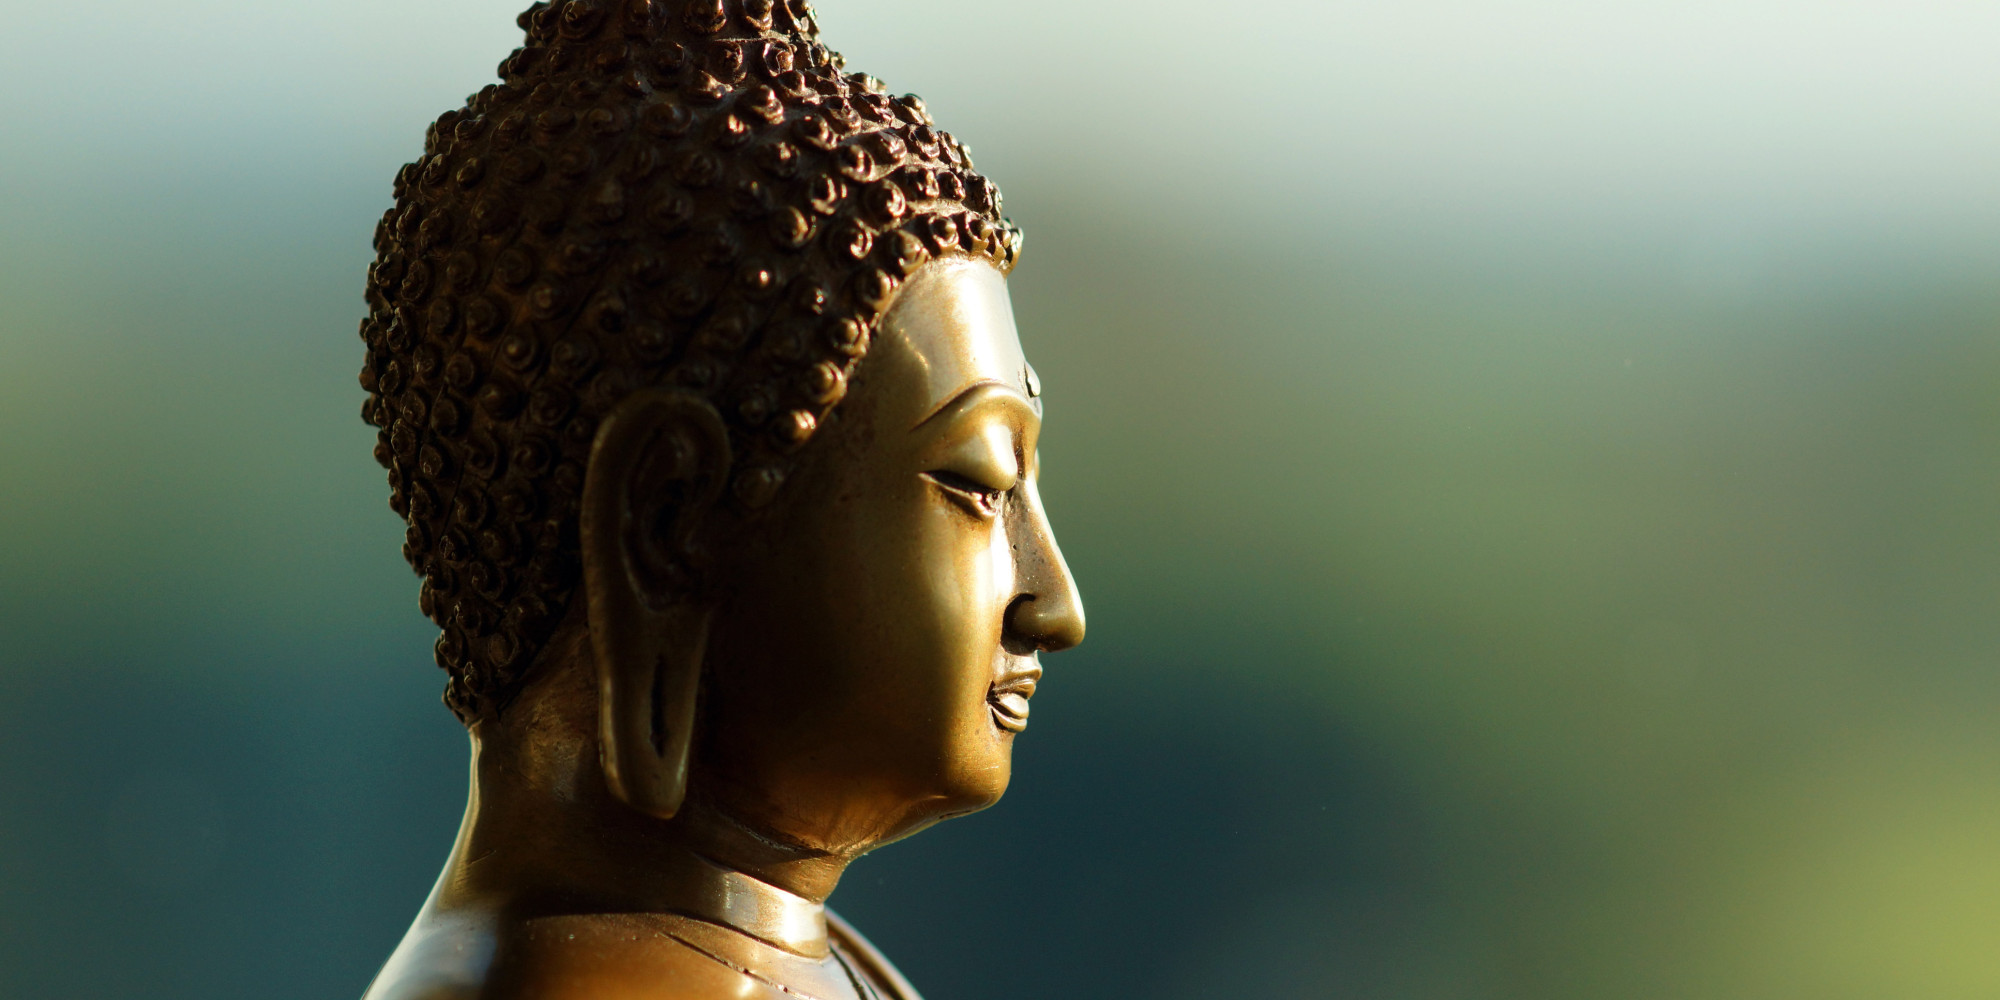 1524788459 Top 85 Inspirational Buddha Quotes And Sayings